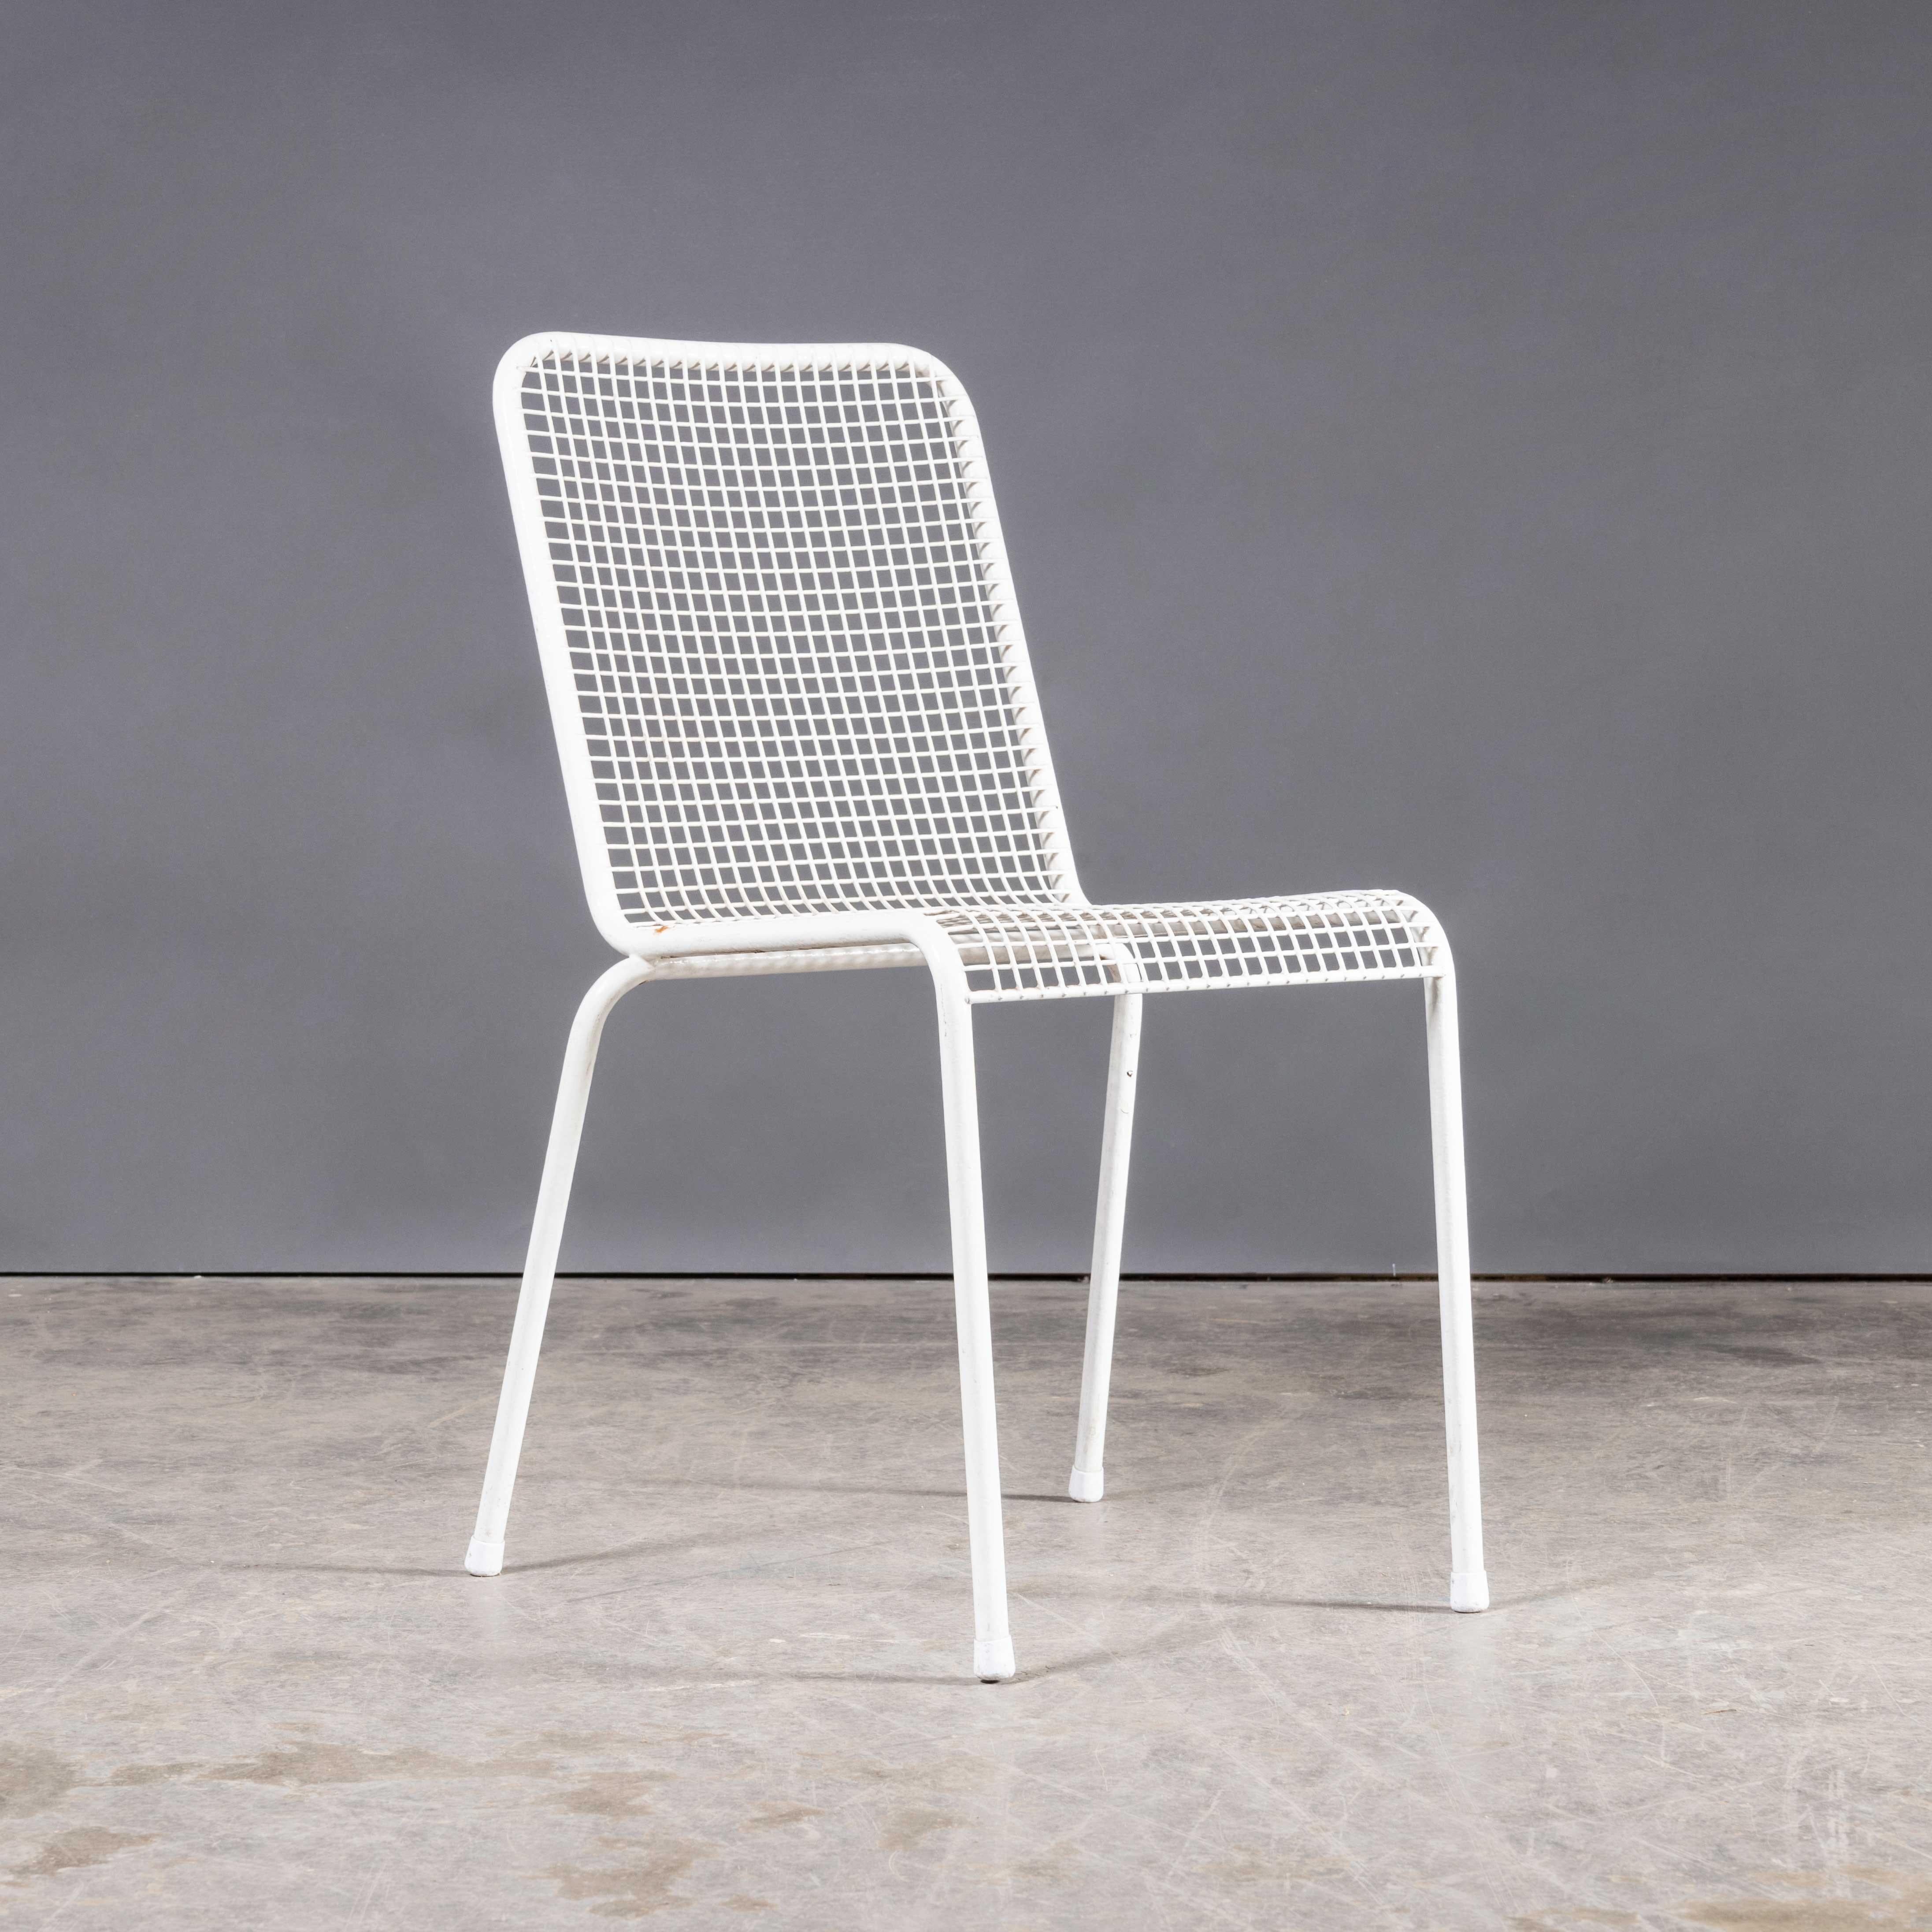 1970’s French Original Wire Mesh White Outdoor Dining Chairs – Set Of Six
1970’s French Original Wire Mesh White Outdoor Dining Chairs – Set Of Six. Simple stylish chairs from France. The frames are steel which was plastic coated, a new technology